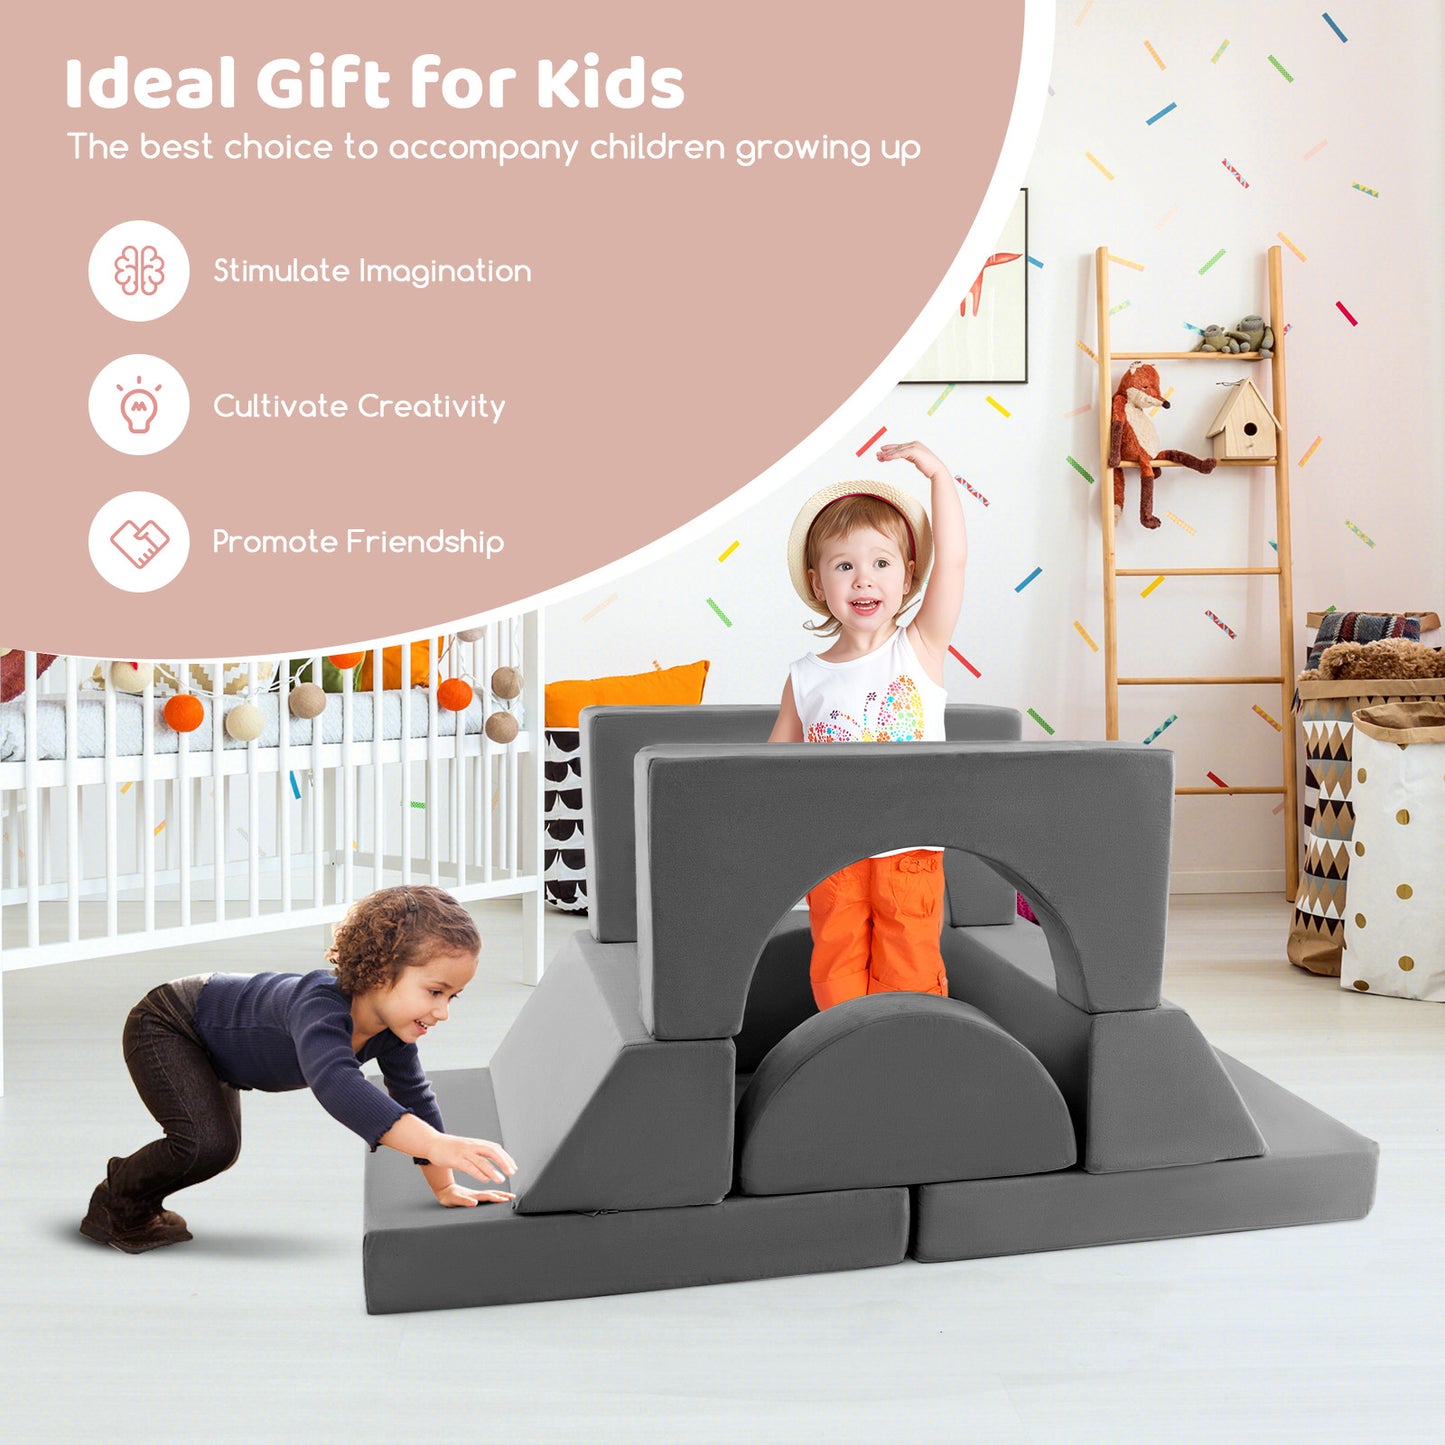 8 Pieces Kids Modular Play Sofa with Detachable Cover for Playroom and Bedroom-Gray